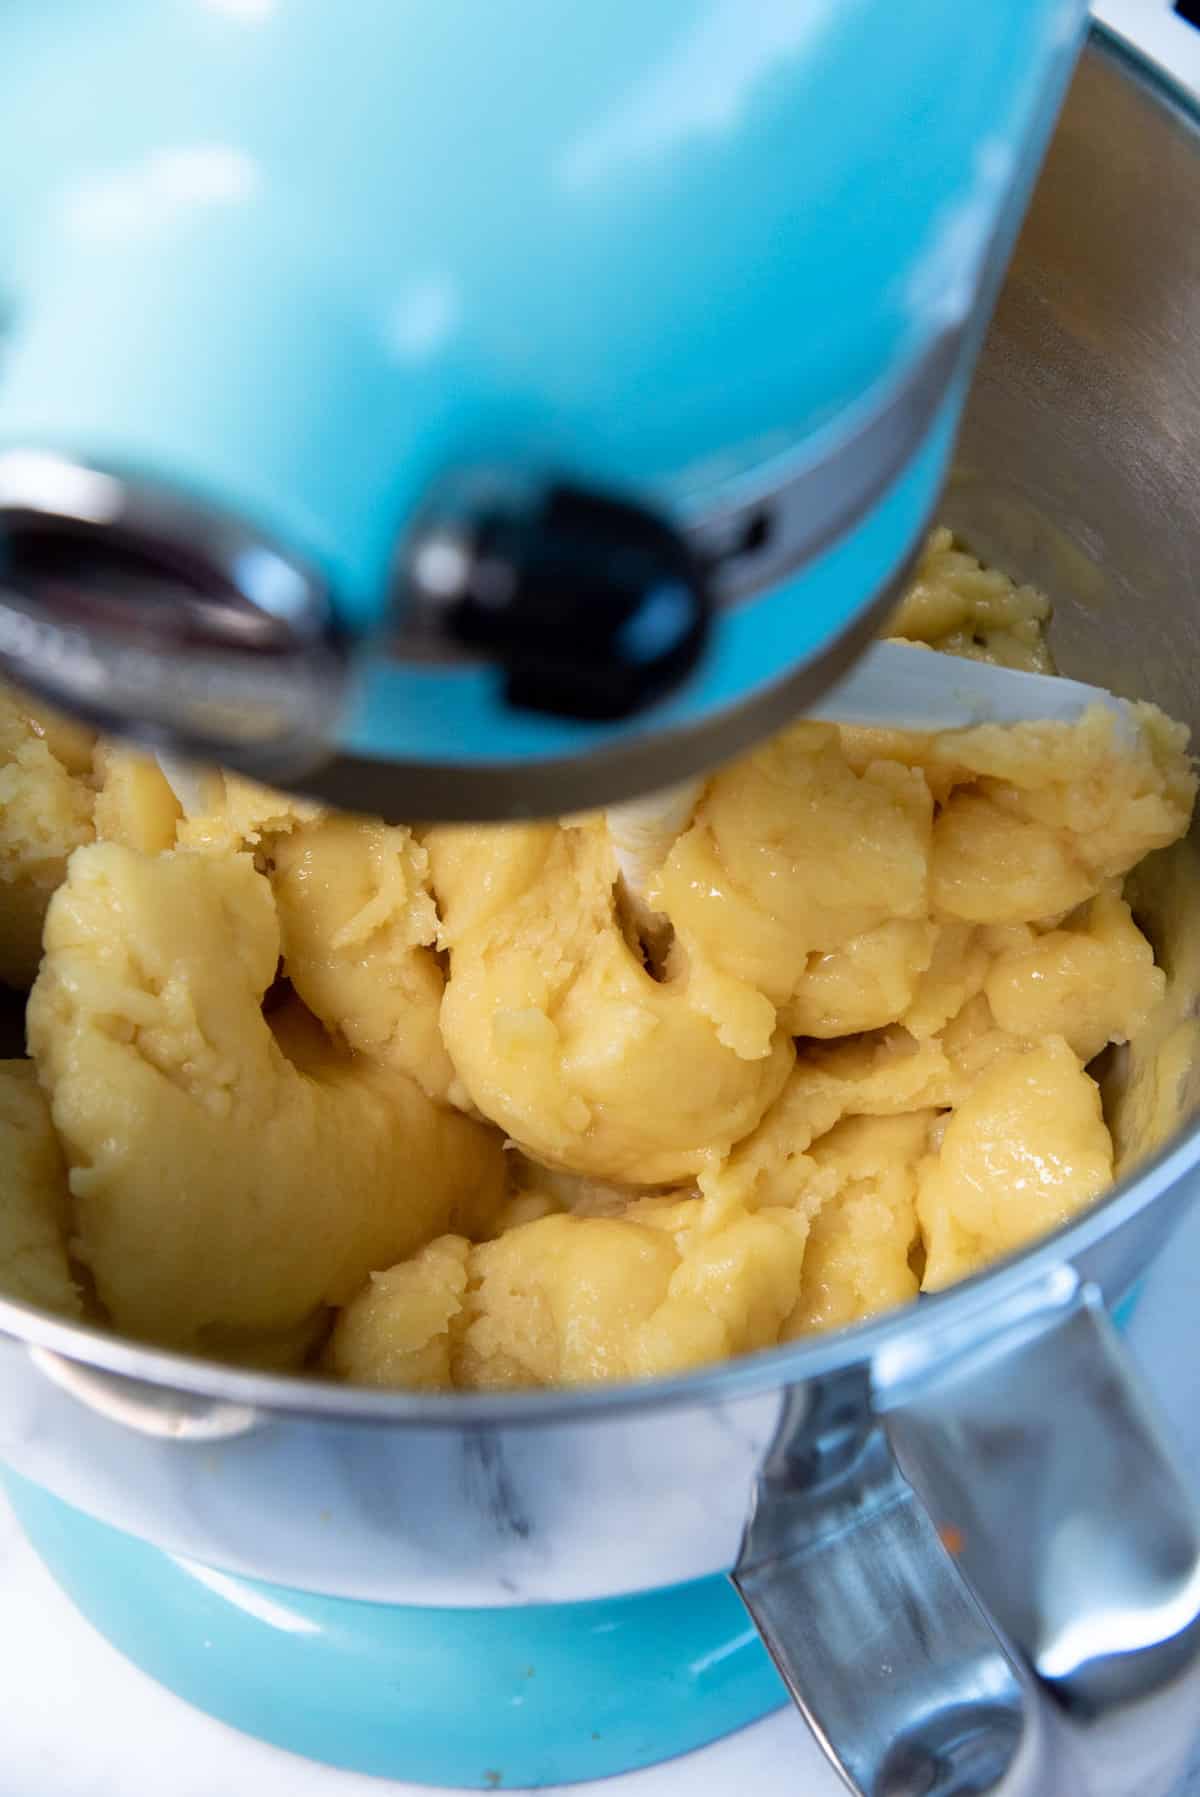 A close up of the choux pastry dough in the bowl of a stand mixer, while eggs are being mixed through.